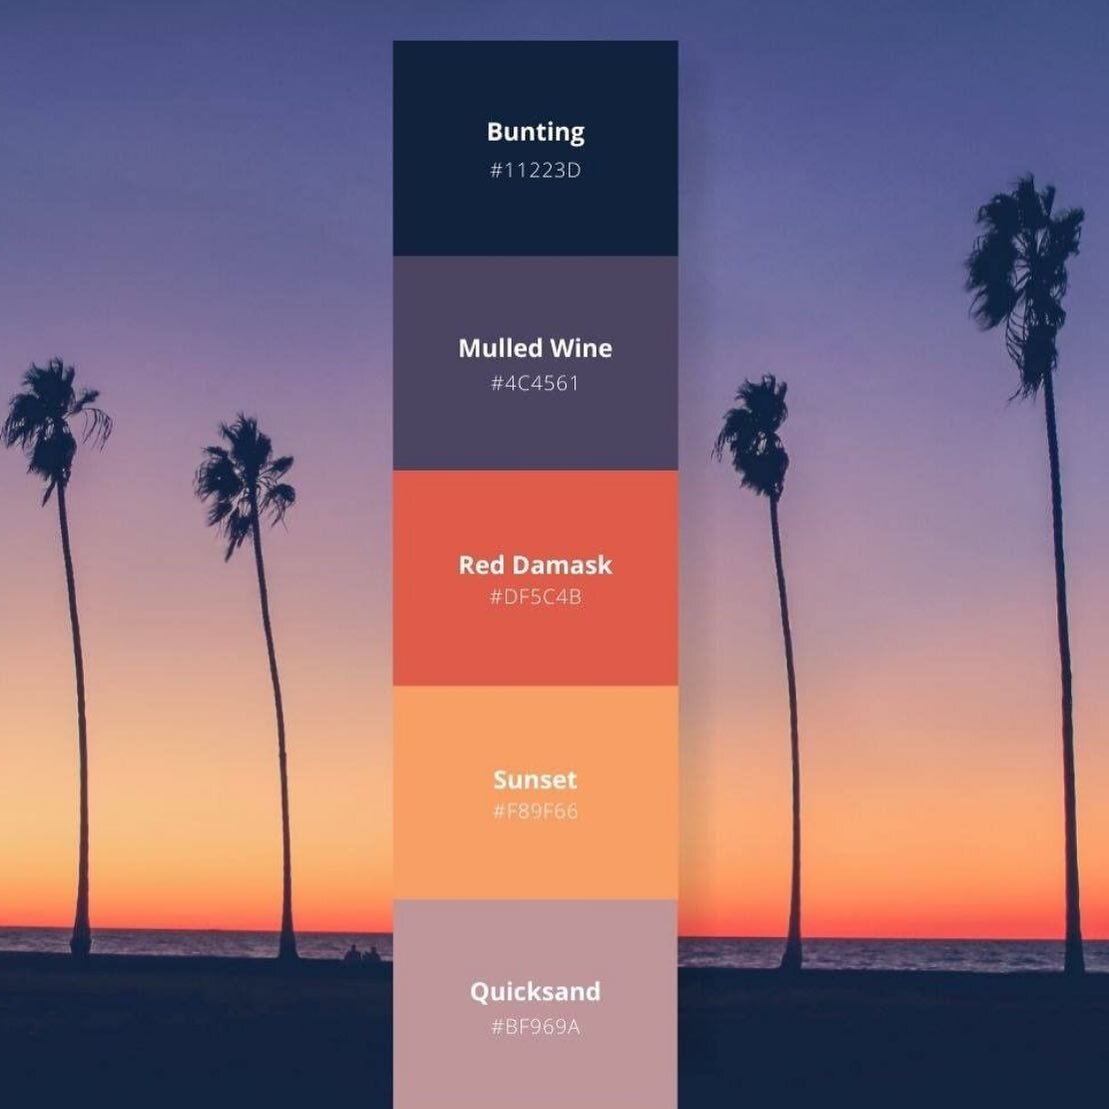 Some #calivibes from @canva. Loving this color palette ☀️🌴
#designinspiration 
.
.
.
.
.
.
#websitedesign #websitedesigner #websitedesignerforwomen #smallbusinesswebsitedesigner